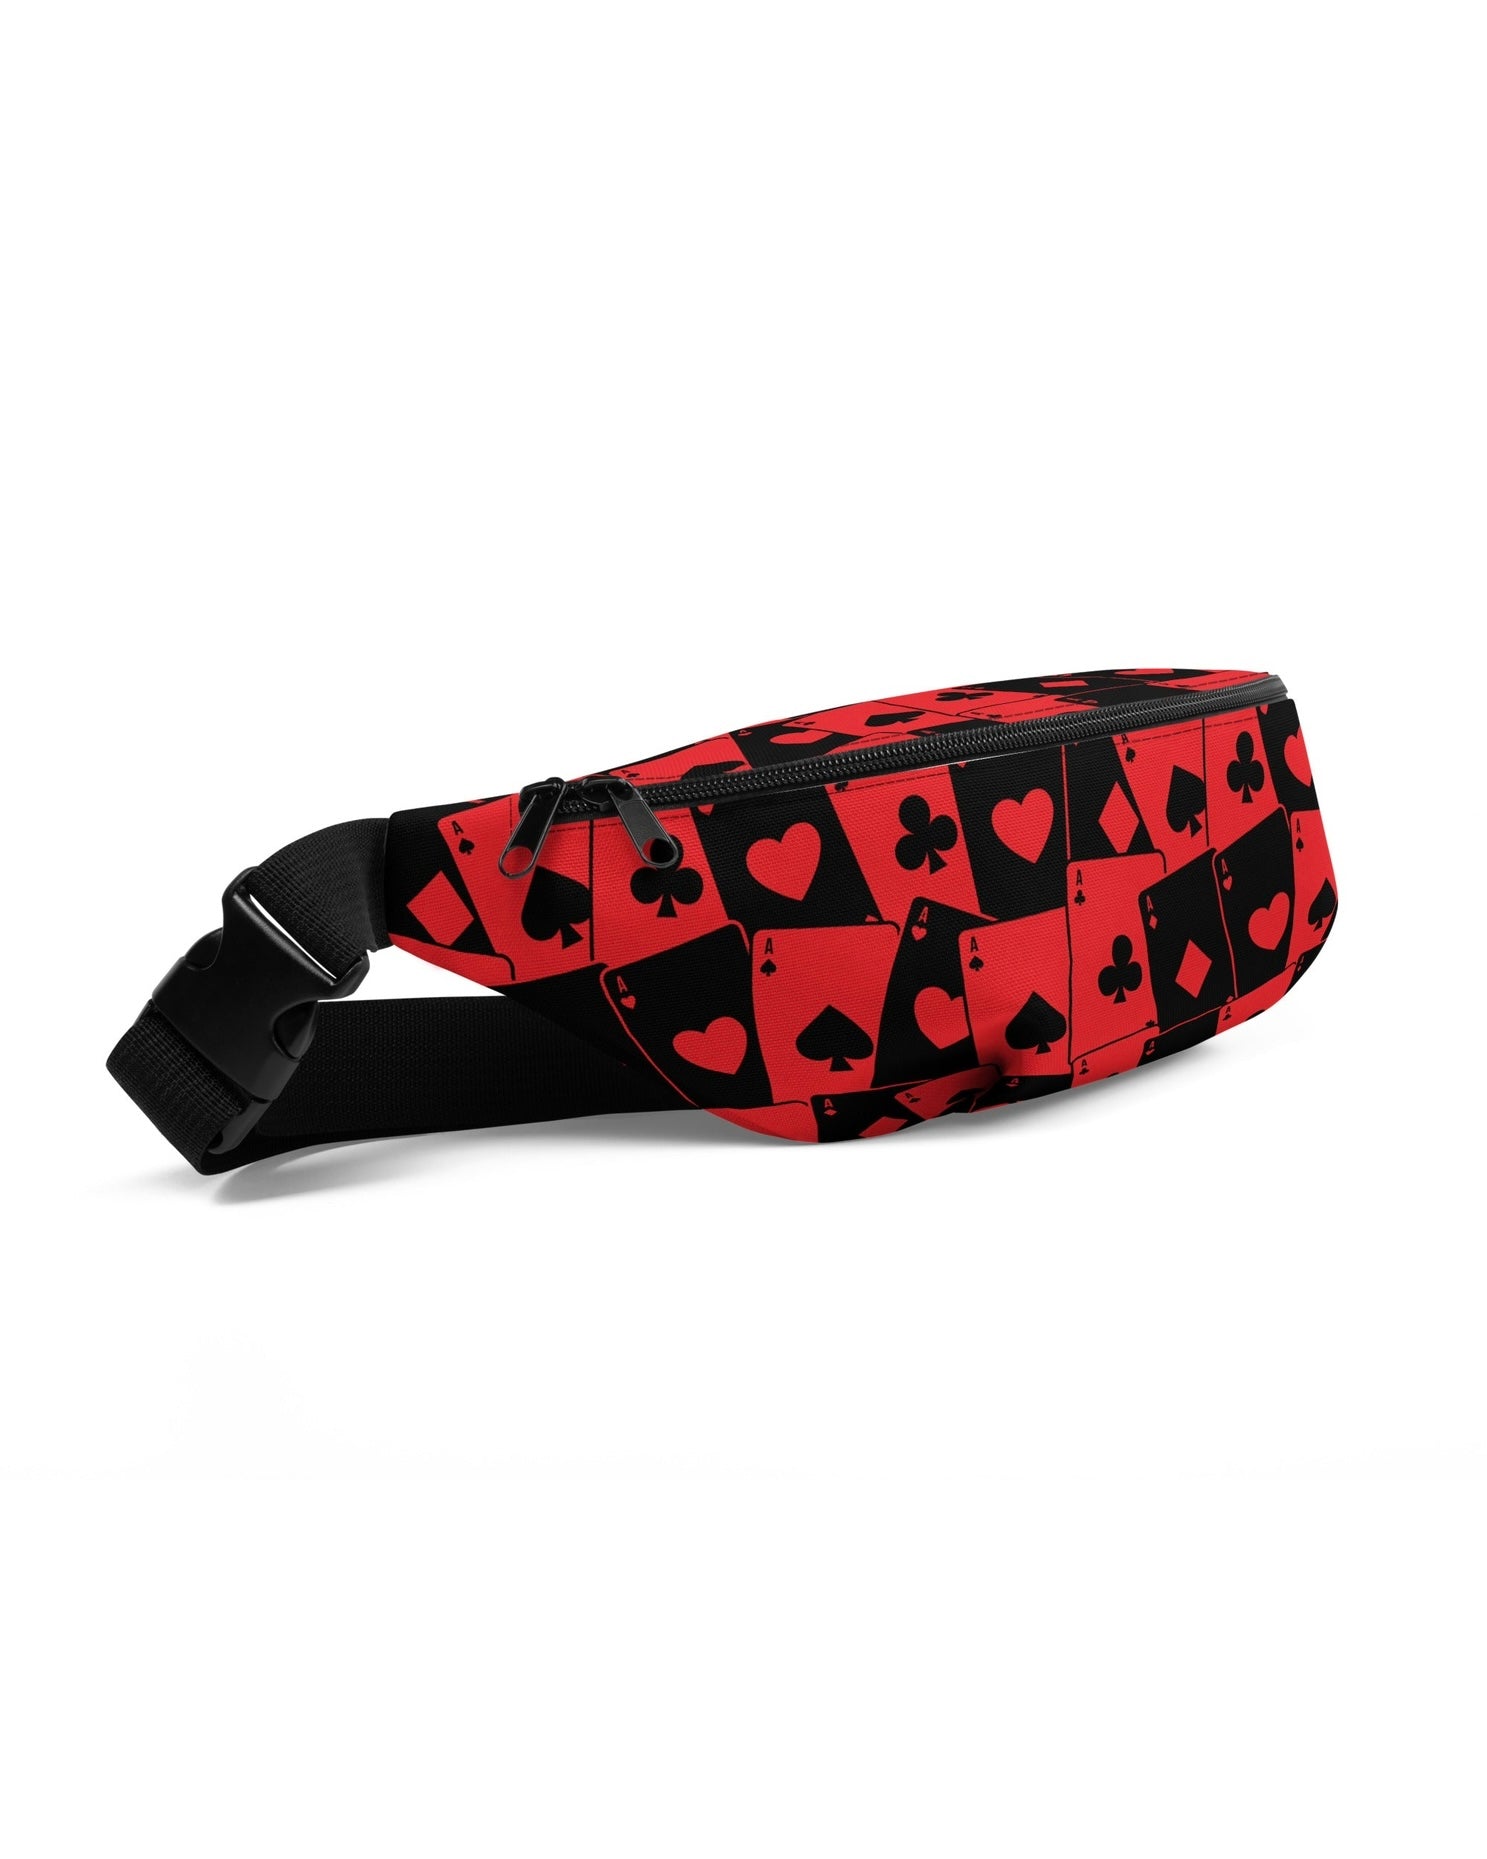 Ace Of Hearts Fanny Pack, Fanny Pack, - One Stop Rave